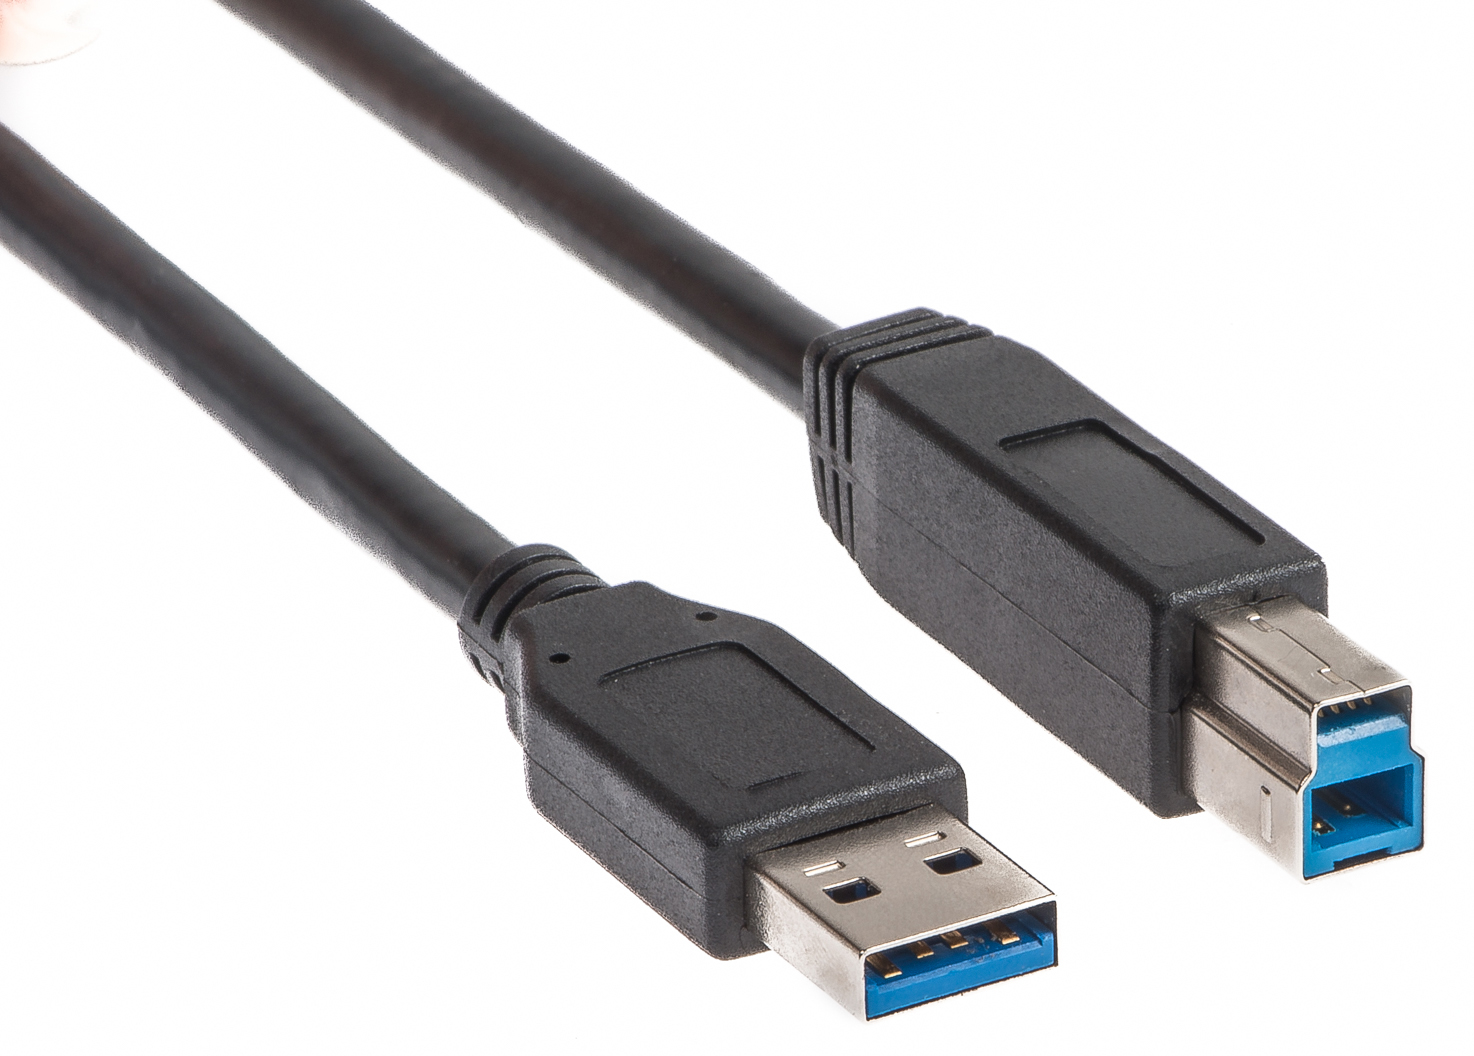 LINK2GO USB 3.0 Cable A-B US3213FBB male/male, 1.0m male/male, 1.0m